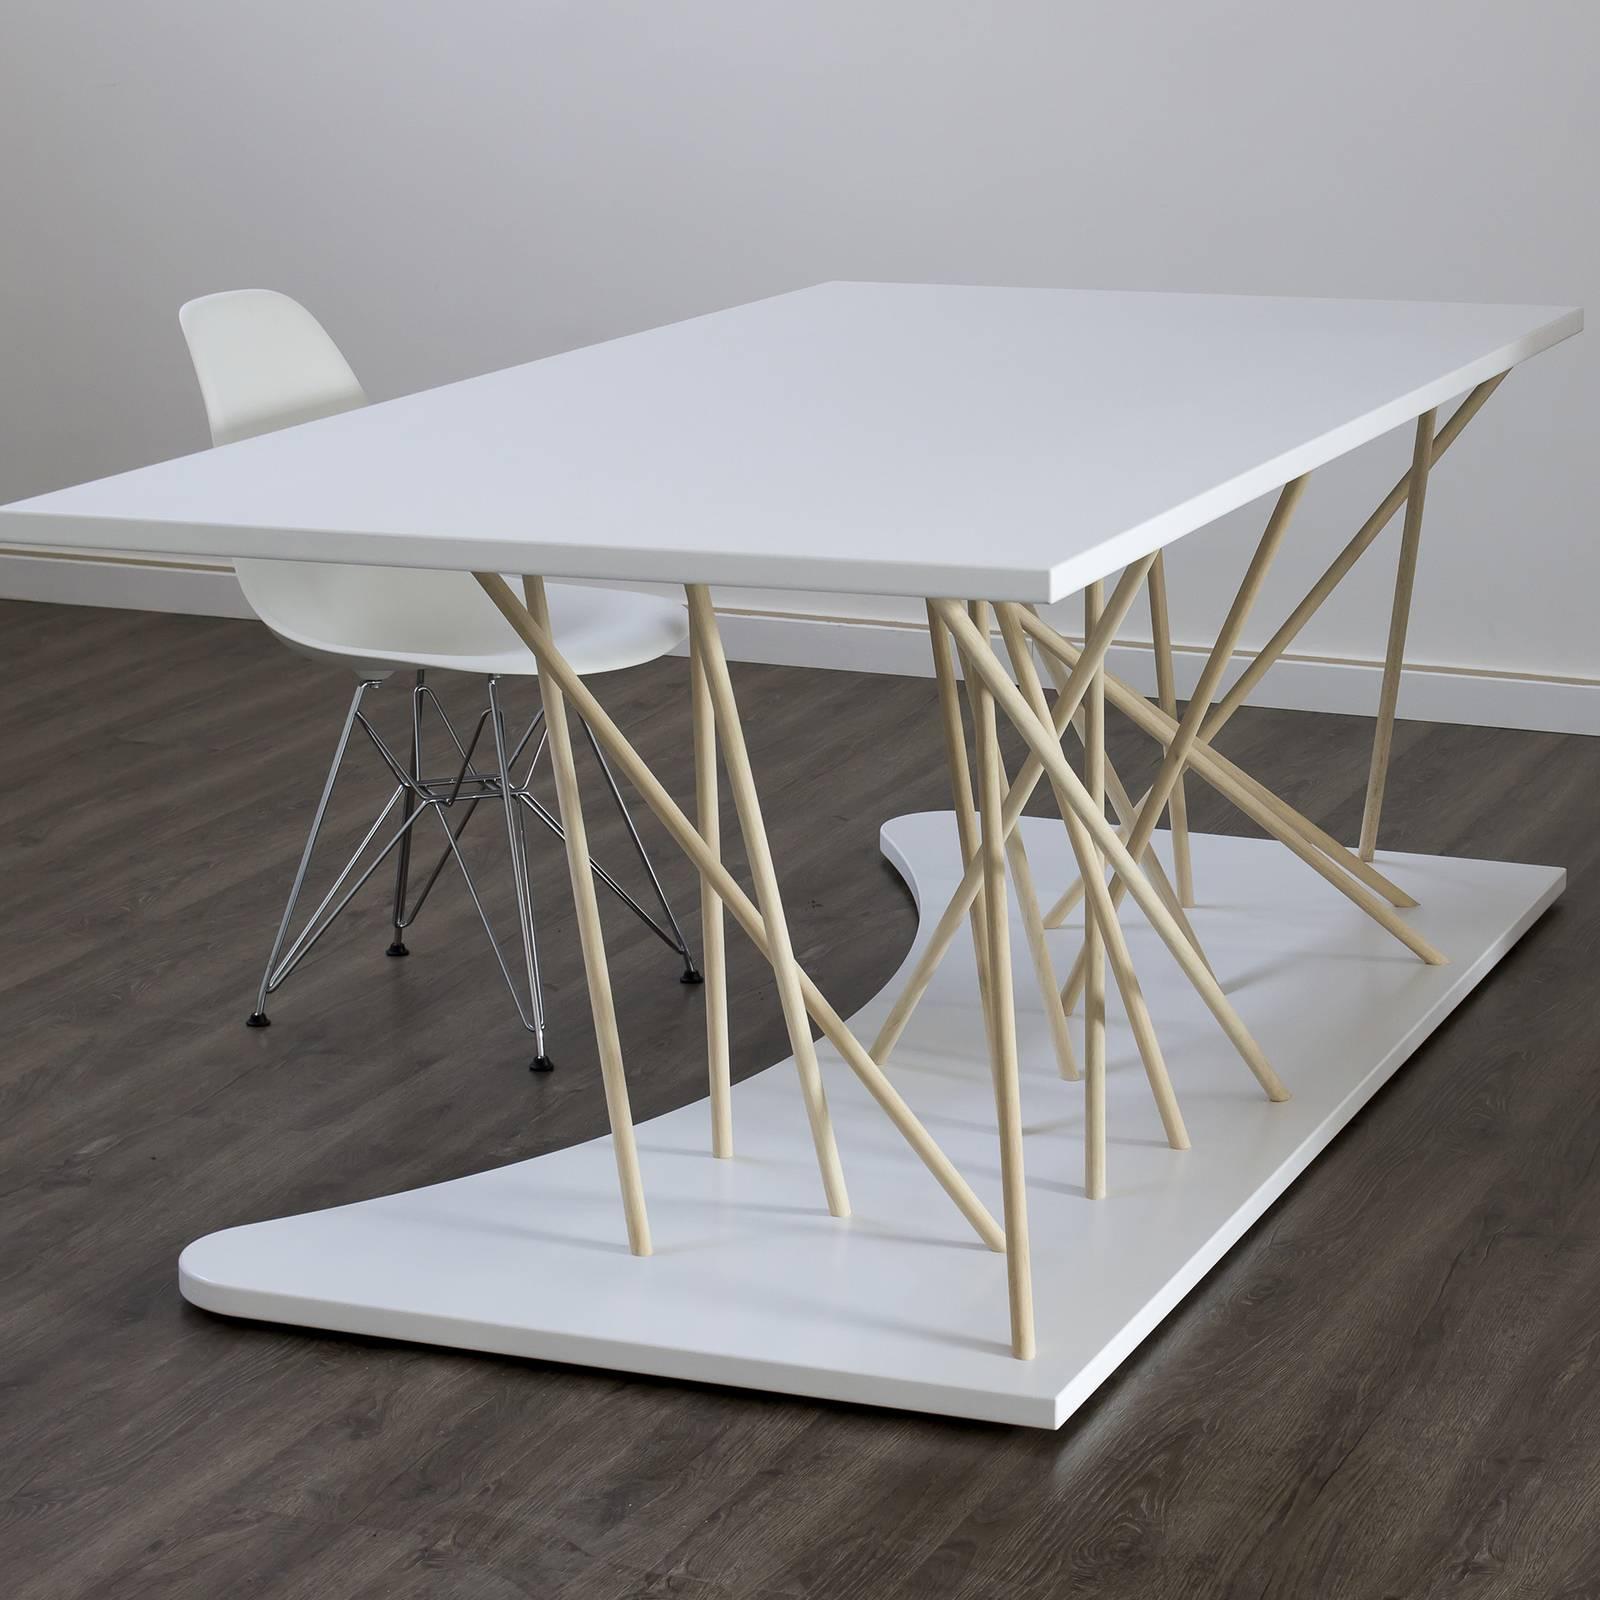 Bold lines and exceptional detailing will make this desk the focal point of any modern-styled office. Handcrafted entirely of solid wood, this piece stands out for its intriguing design achieved by the intersection of natural-finished rods with the